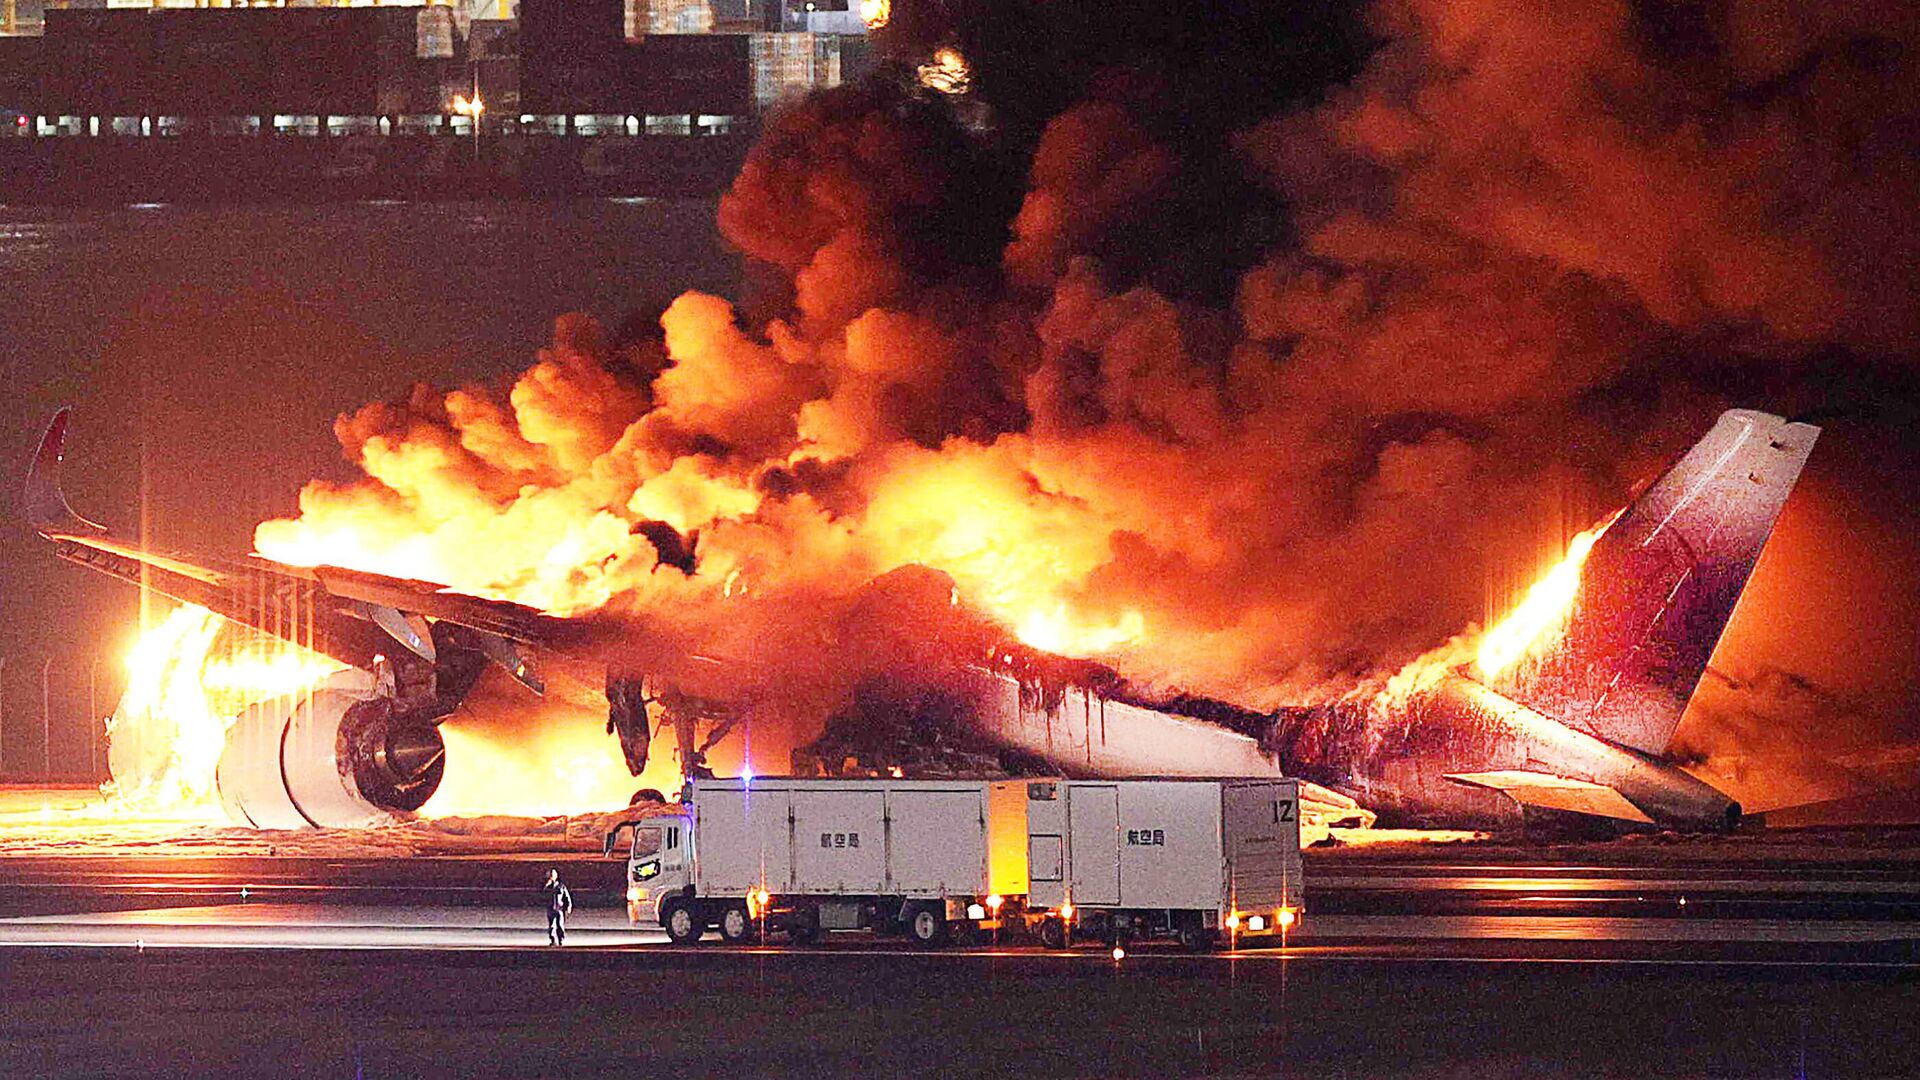 Travellers shocked by Japan plane fire, relieved passengers saved